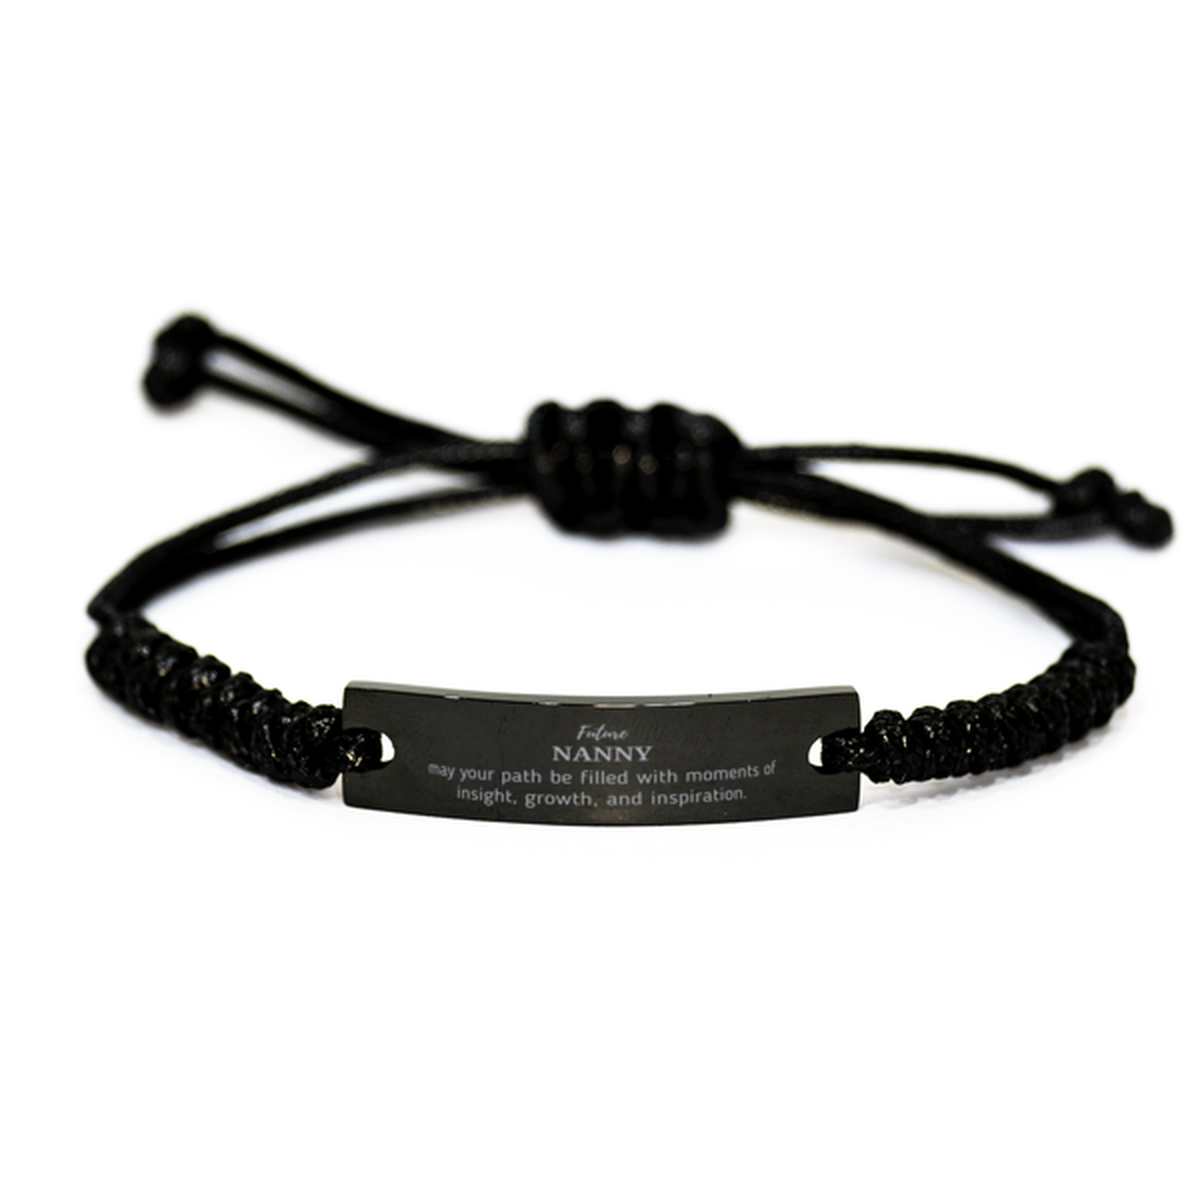 Future Nanny Gifts, May your path be filled with moments of insight, Graduation Gifts for New Nanny, Christmas Unique Black Rope Bracelet For Men, Women, Friends